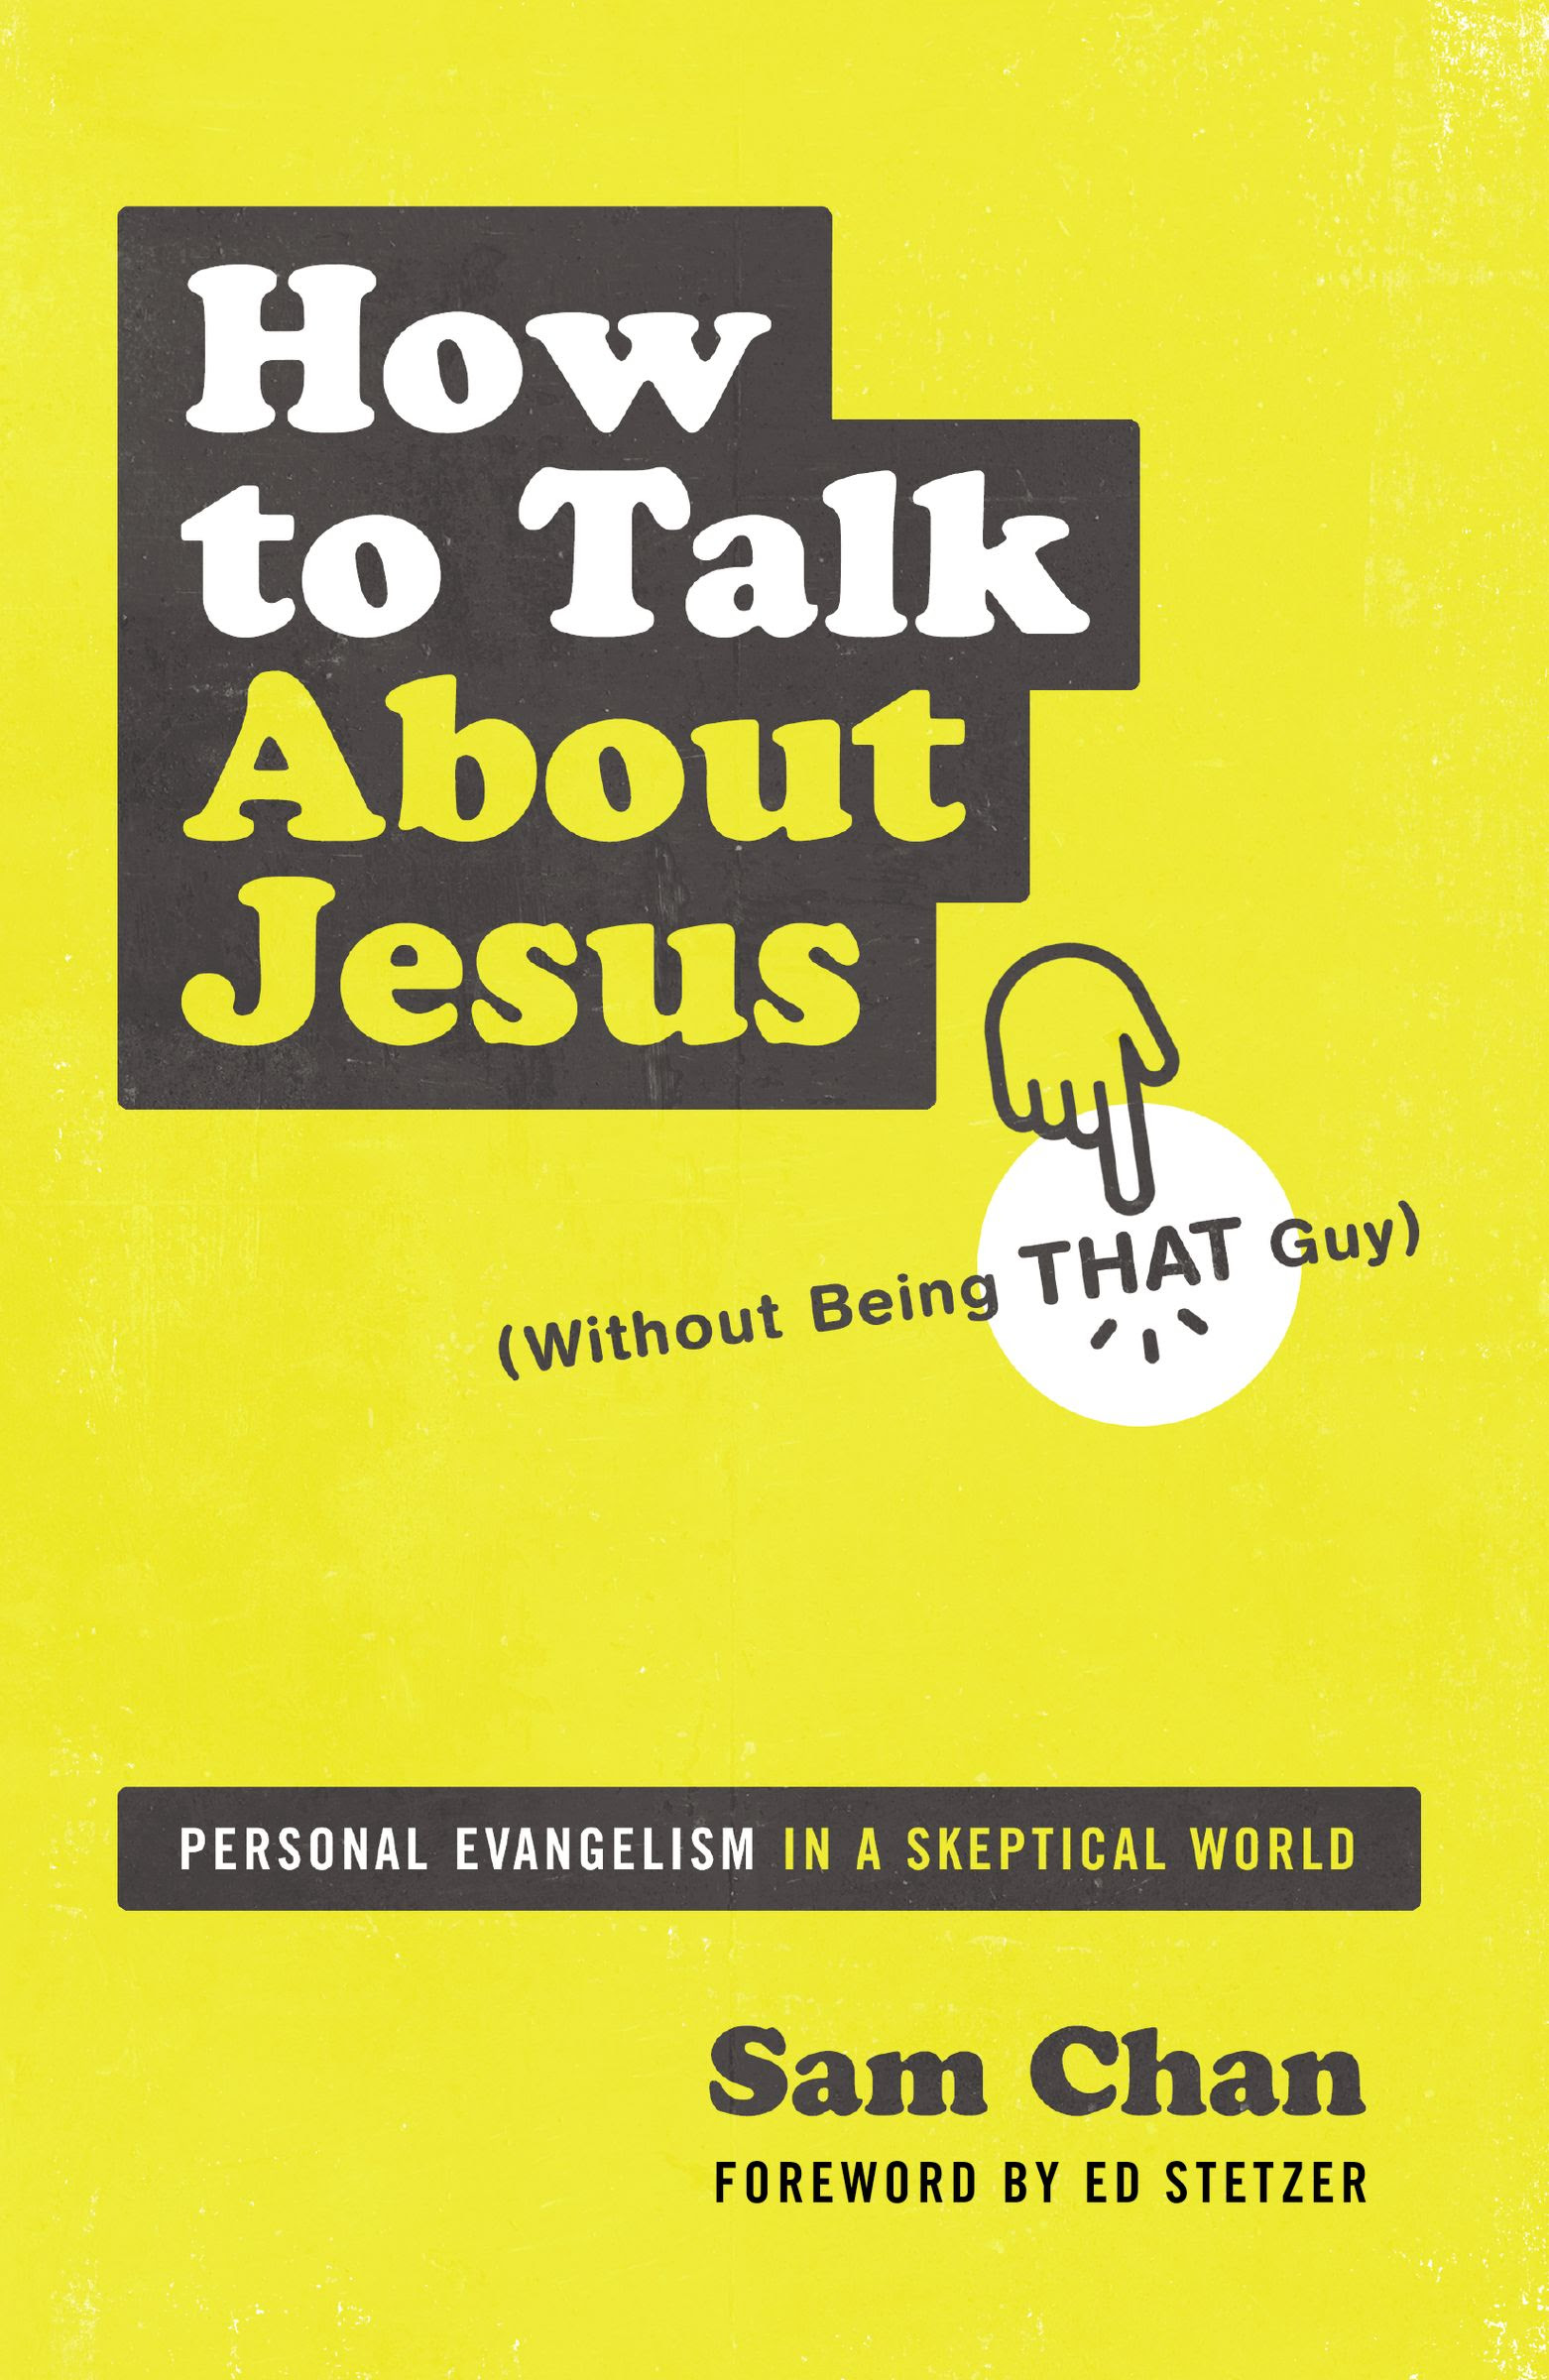 How to Talk about Jesus (Without Being That Guy): Personal Evangelism in a Skeptical World PDF